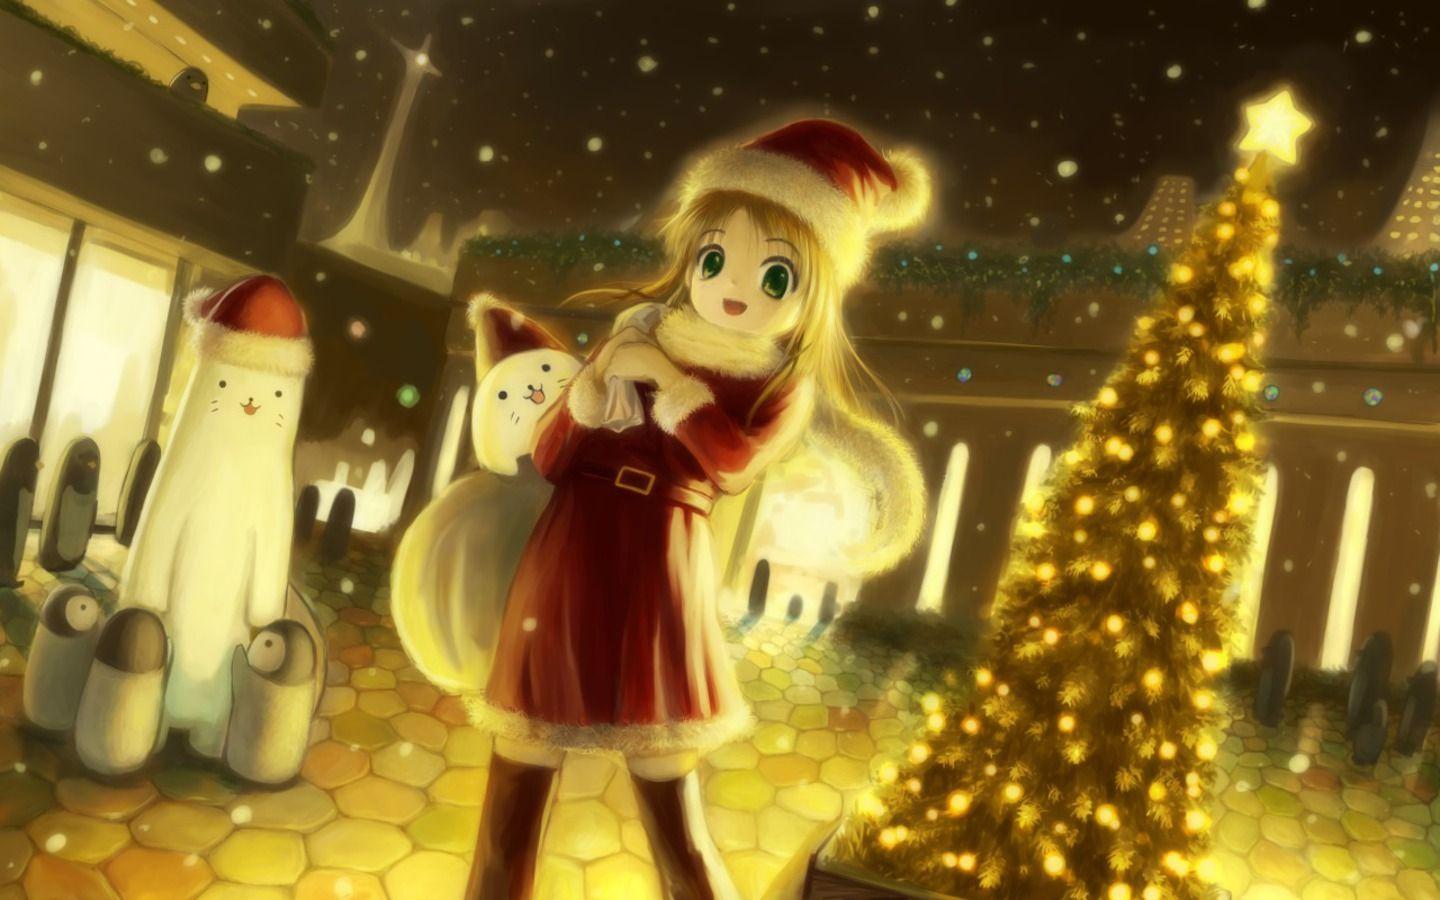 Anime Christmas Scenery Wallpapers - Wallpaper Cave